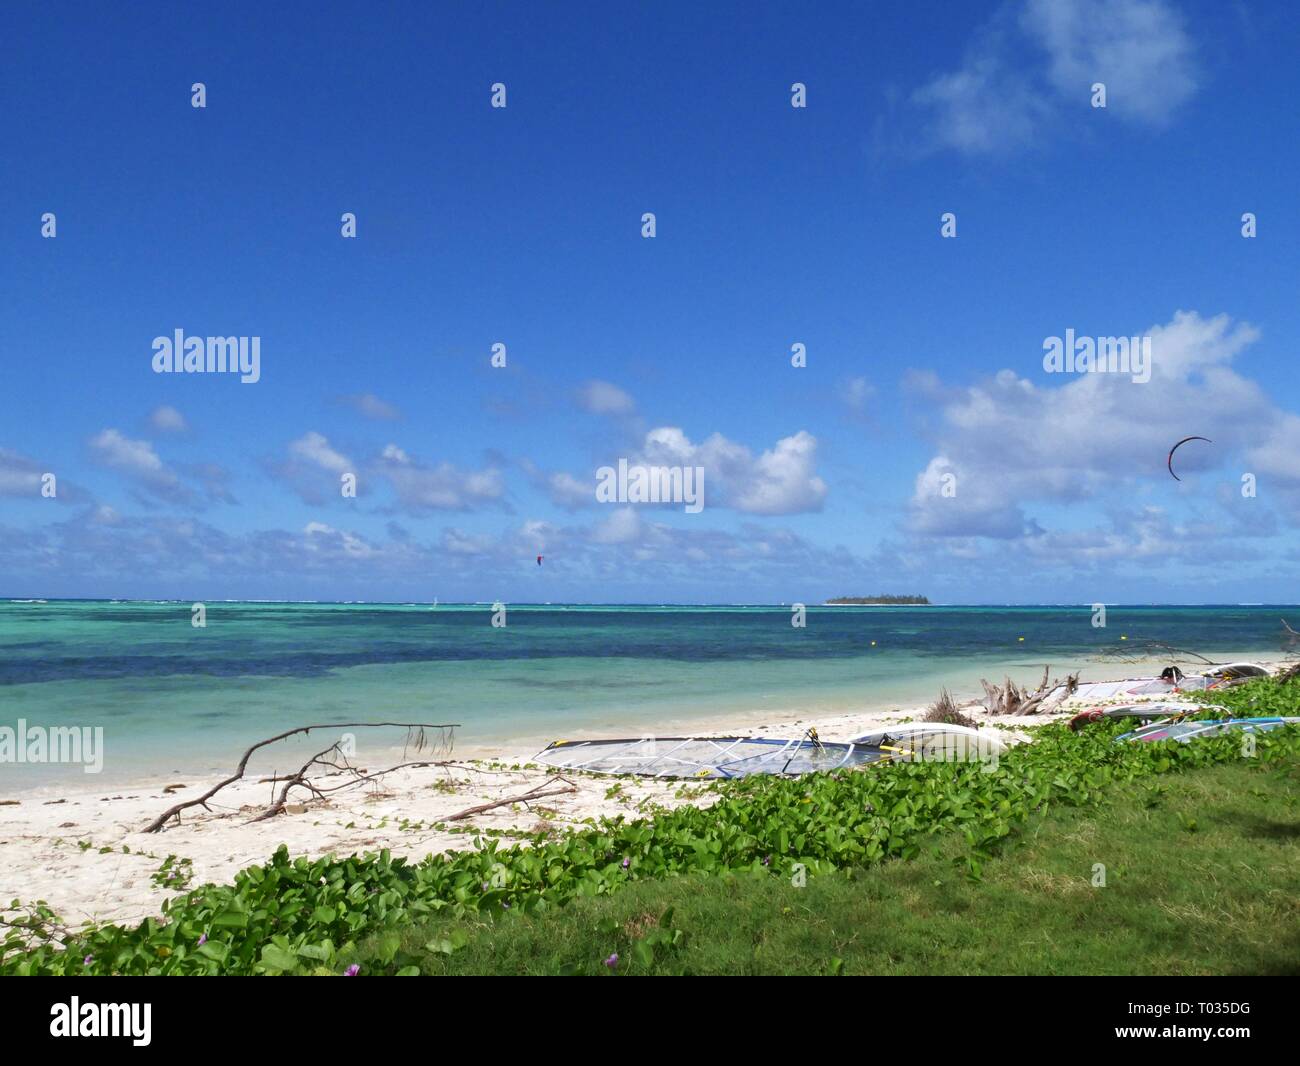 Micro Beach on Saipan, with debris all over the beach after a storm. Seen in the distance is Managaha Island Stock Photo